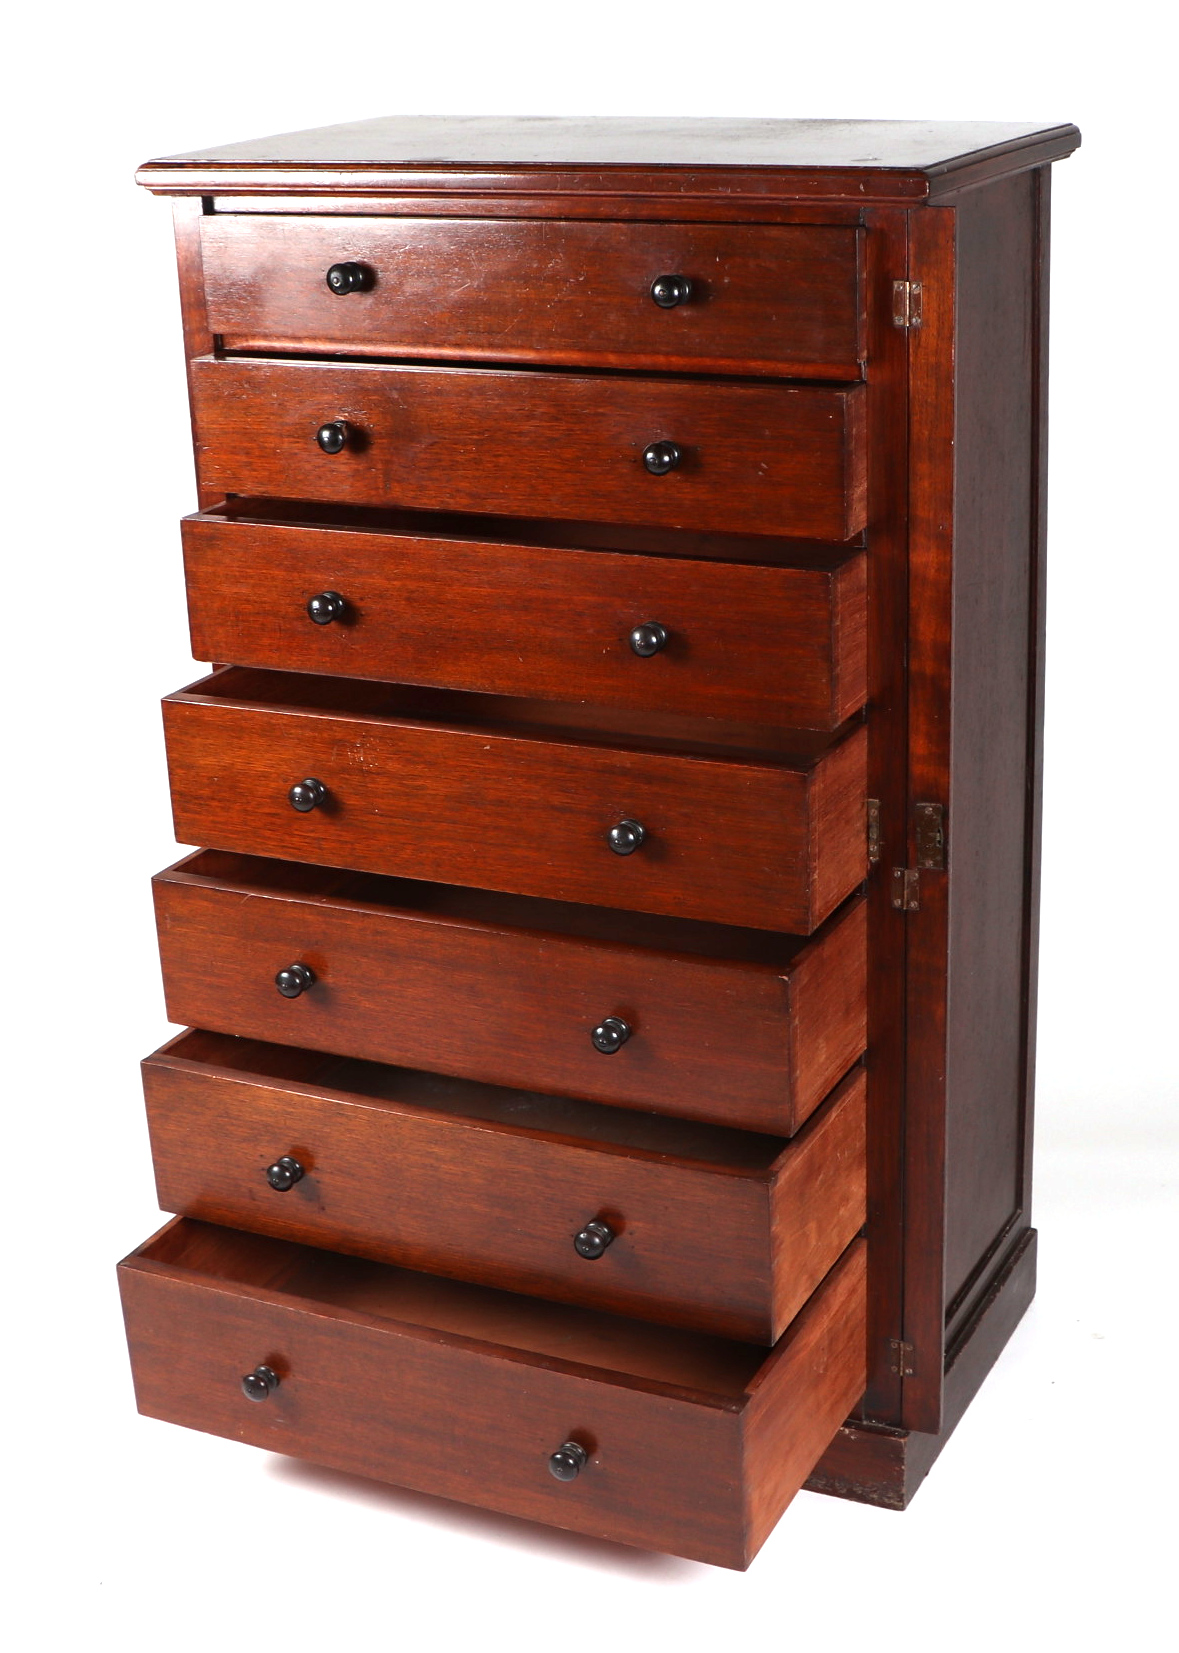 19th century mahogany wellington chest, having an arrangement of seven drawers on a plinth base, - Image 2 of 2